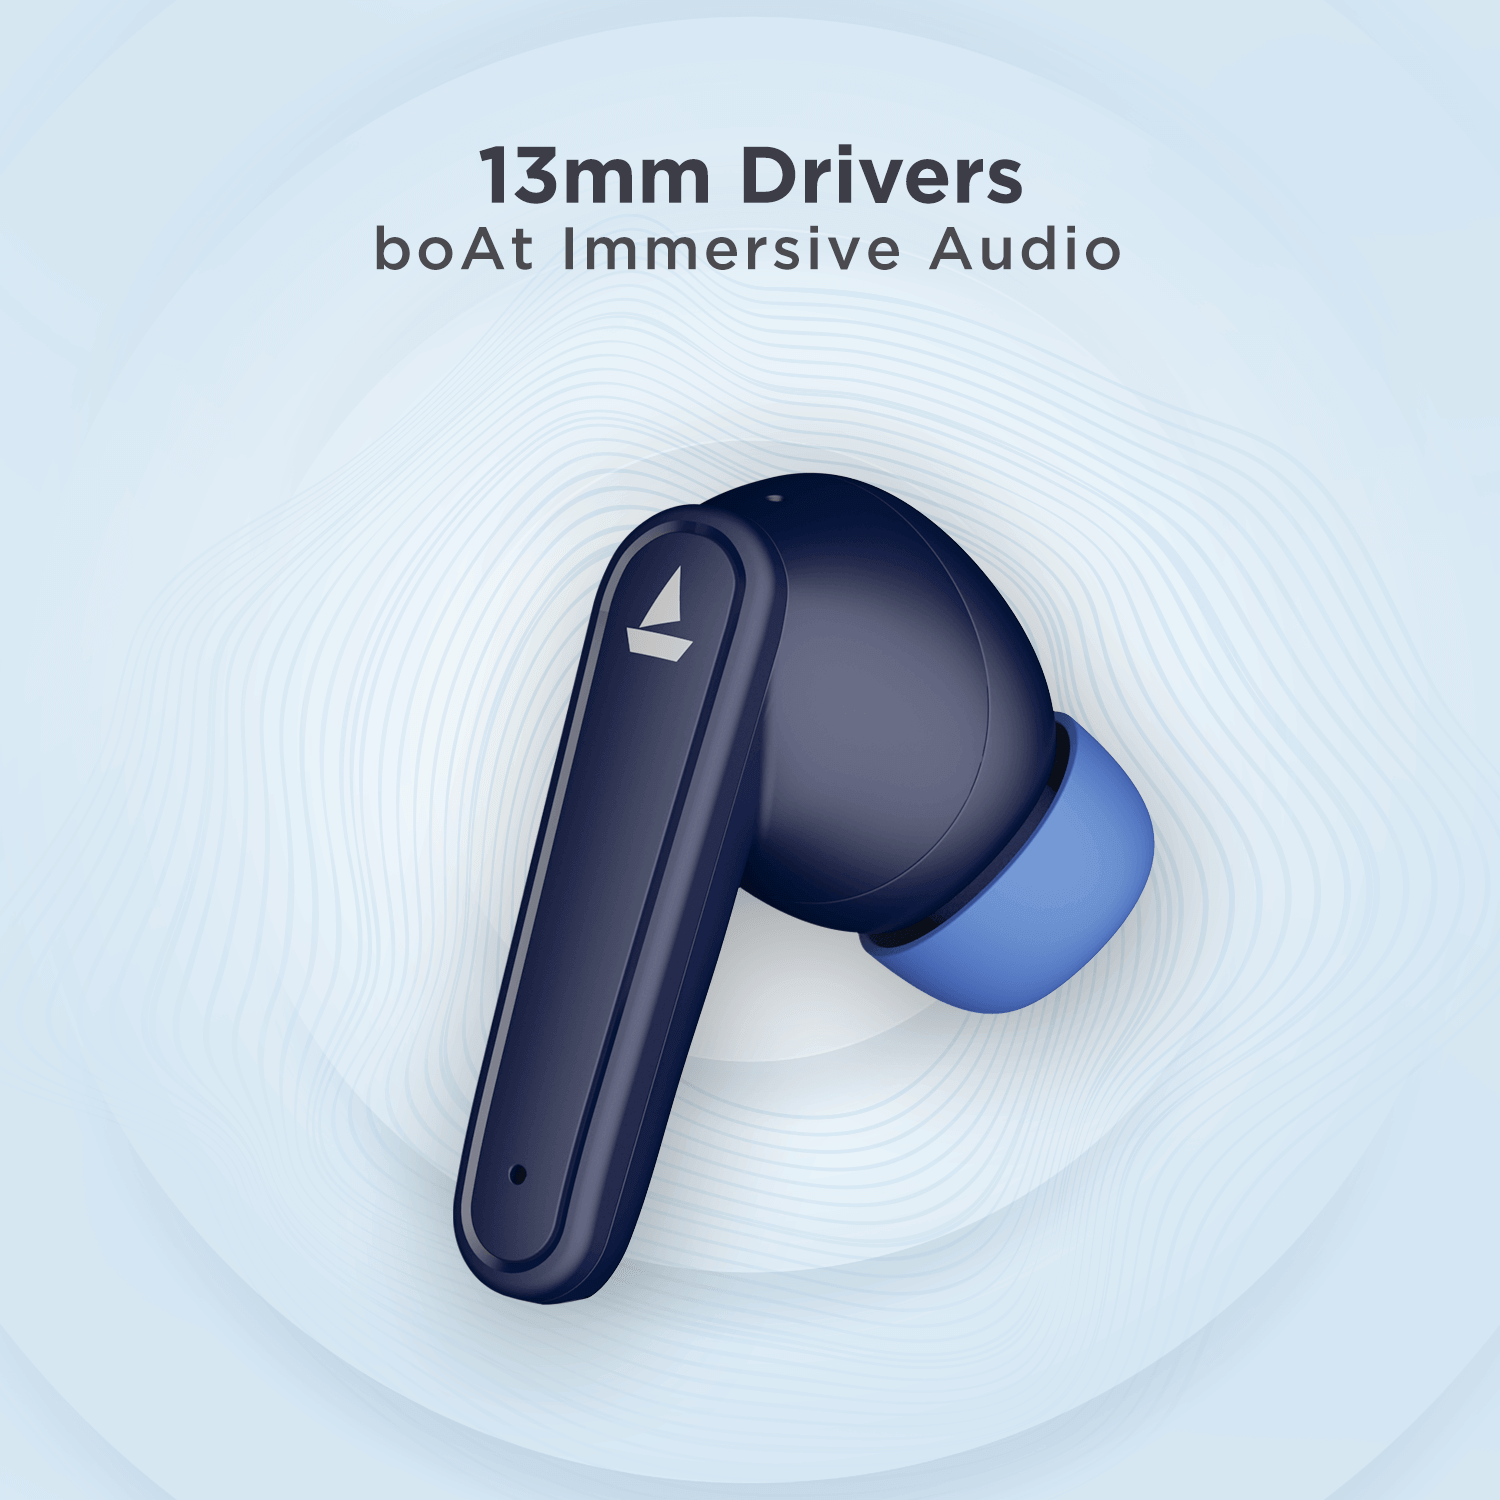 boAt Airdopes 113 | True Wireless Gaming Earbuds with Powerful 13mm Drivers, Beast™ Mode for Gaming, ENx™ Technology, Upto 24 hours of Continuous Playback